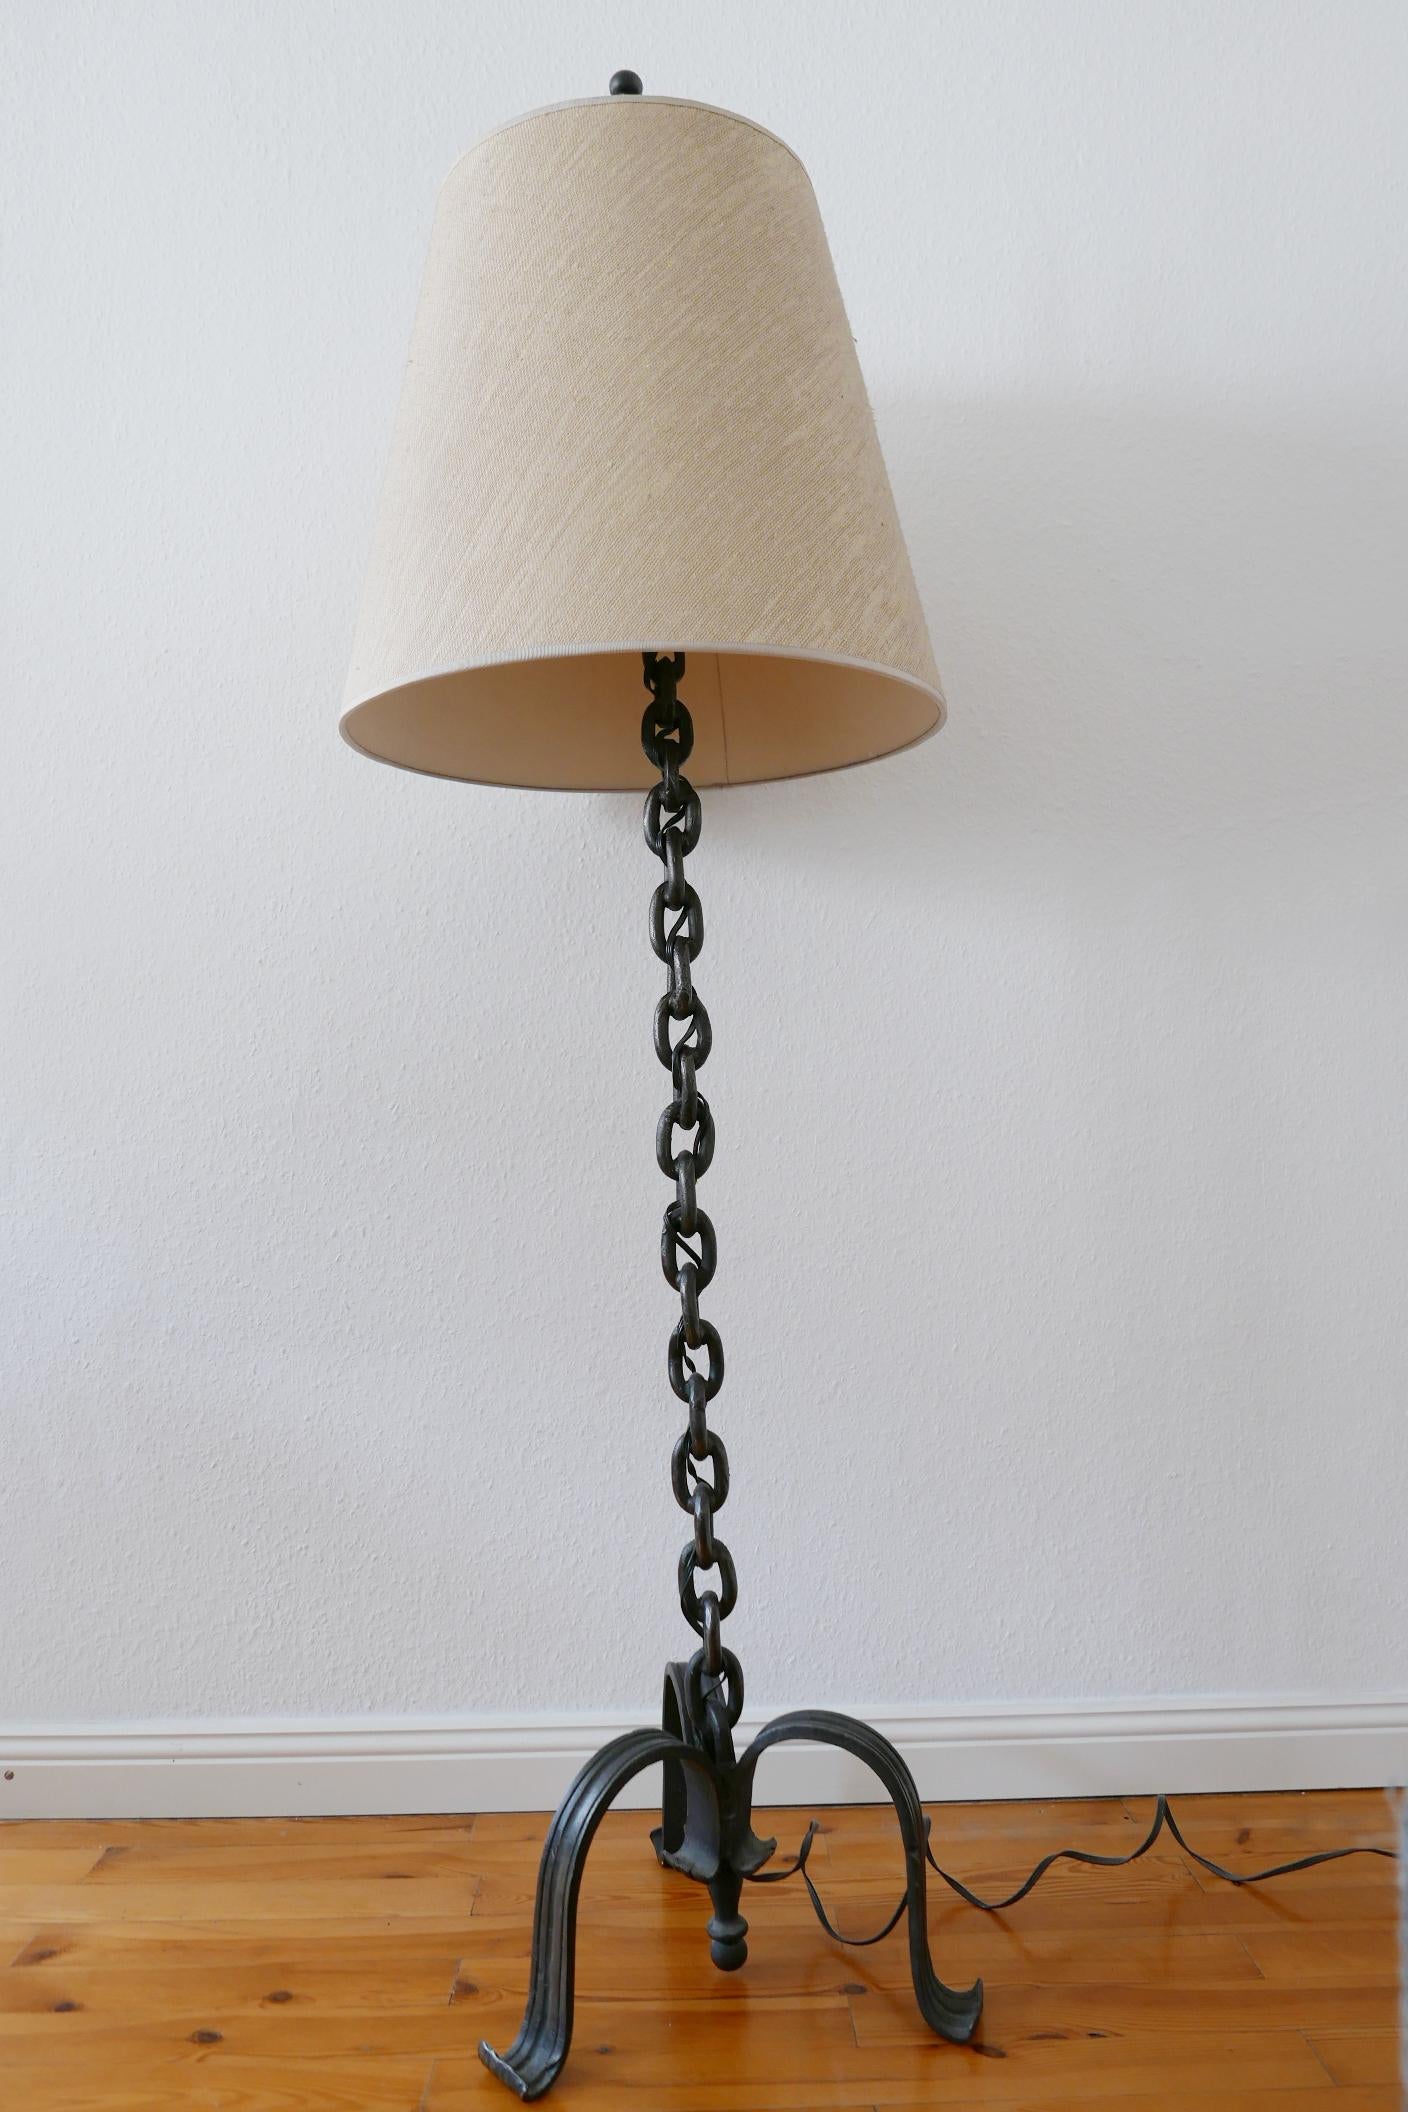 Mid-Century Modern Franz West Style Wrought Iron Chain Floor Lamp 1960s, Germany For Sale 6